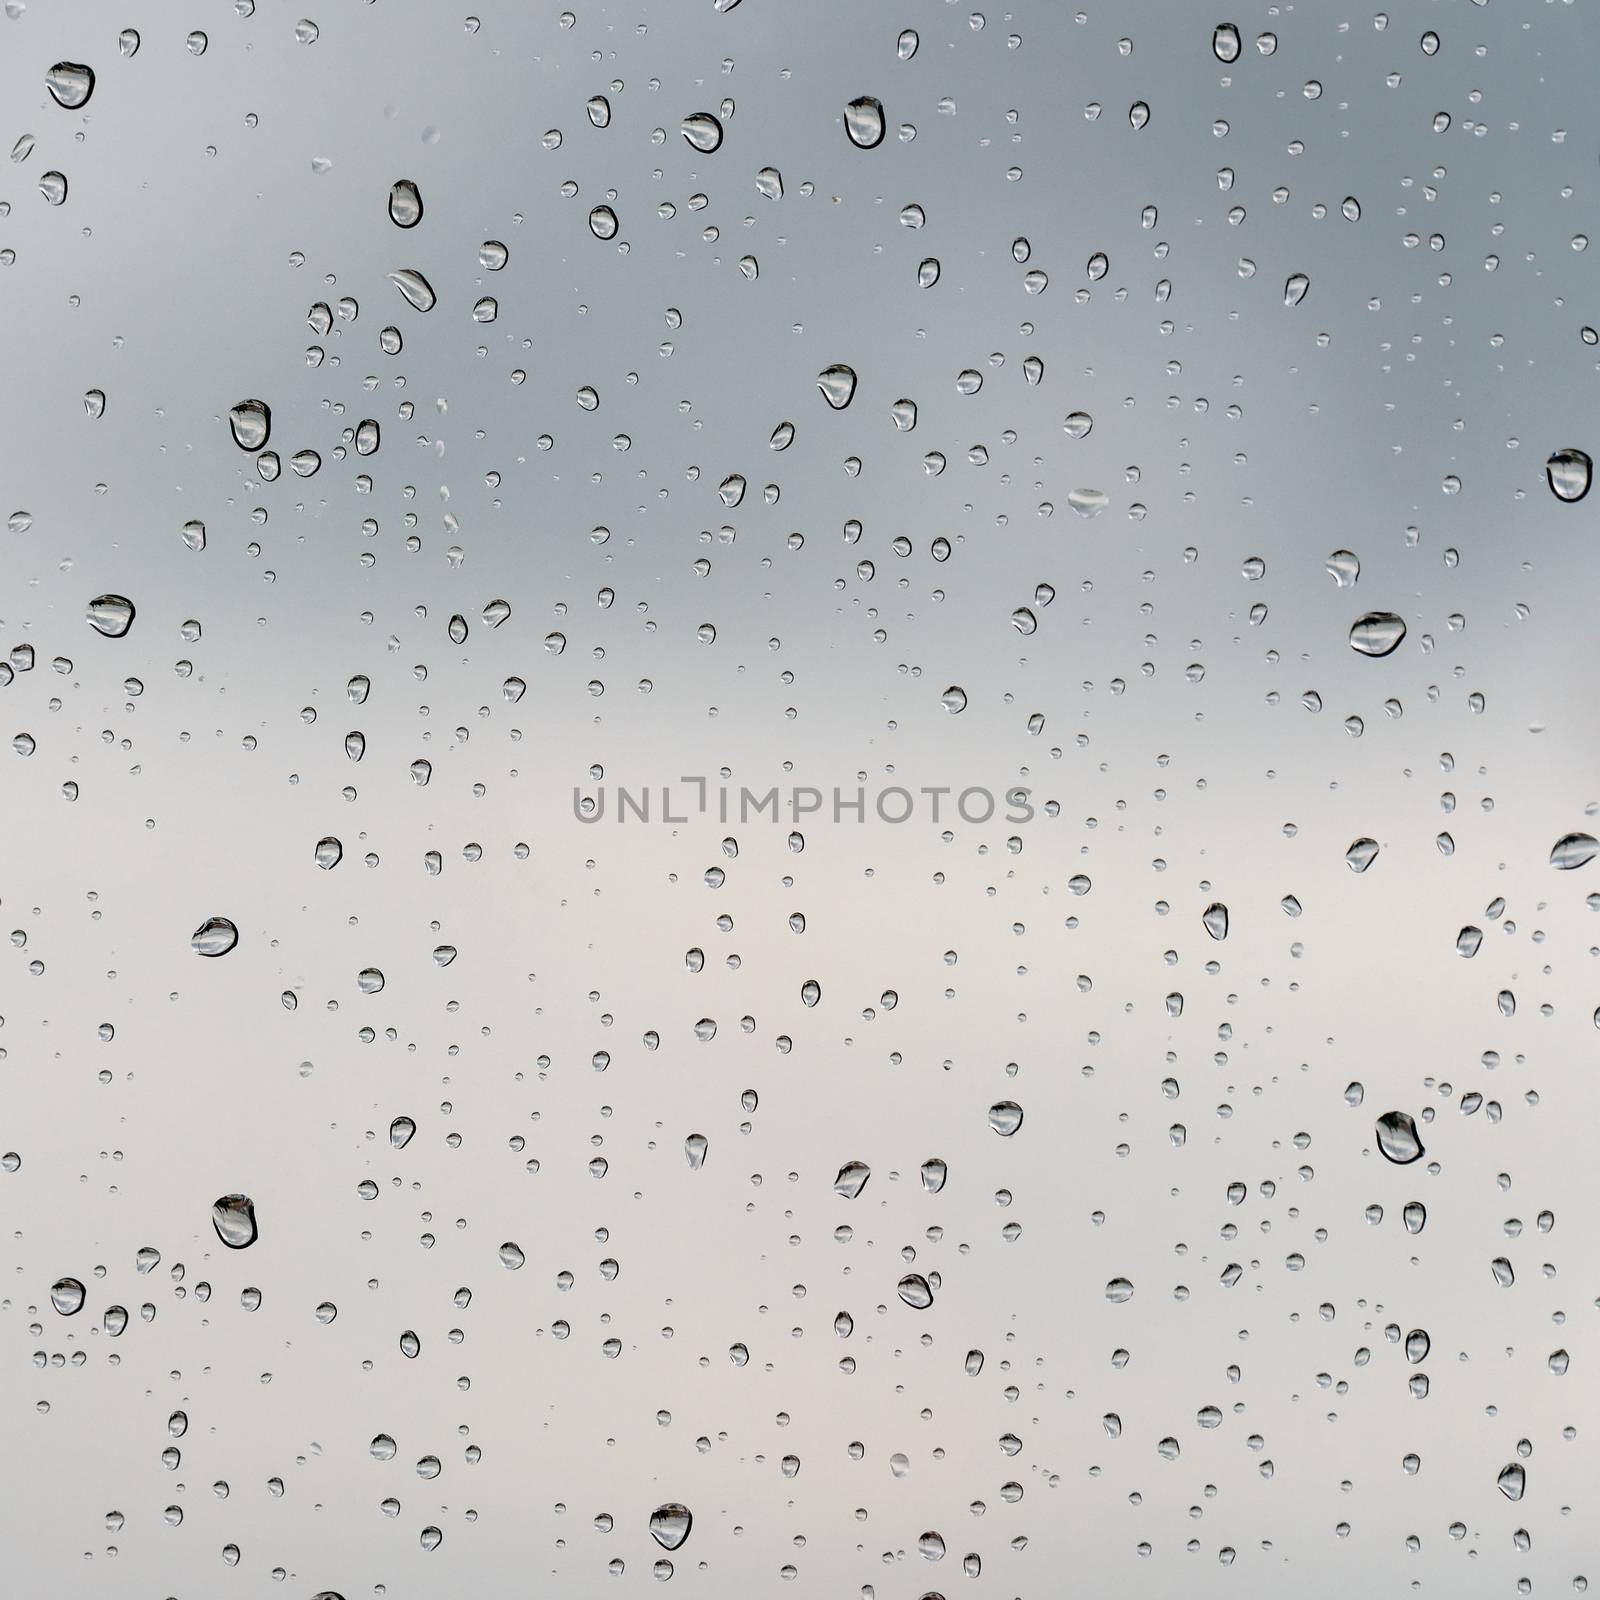 Raindrops on a glass by dutourdumonde